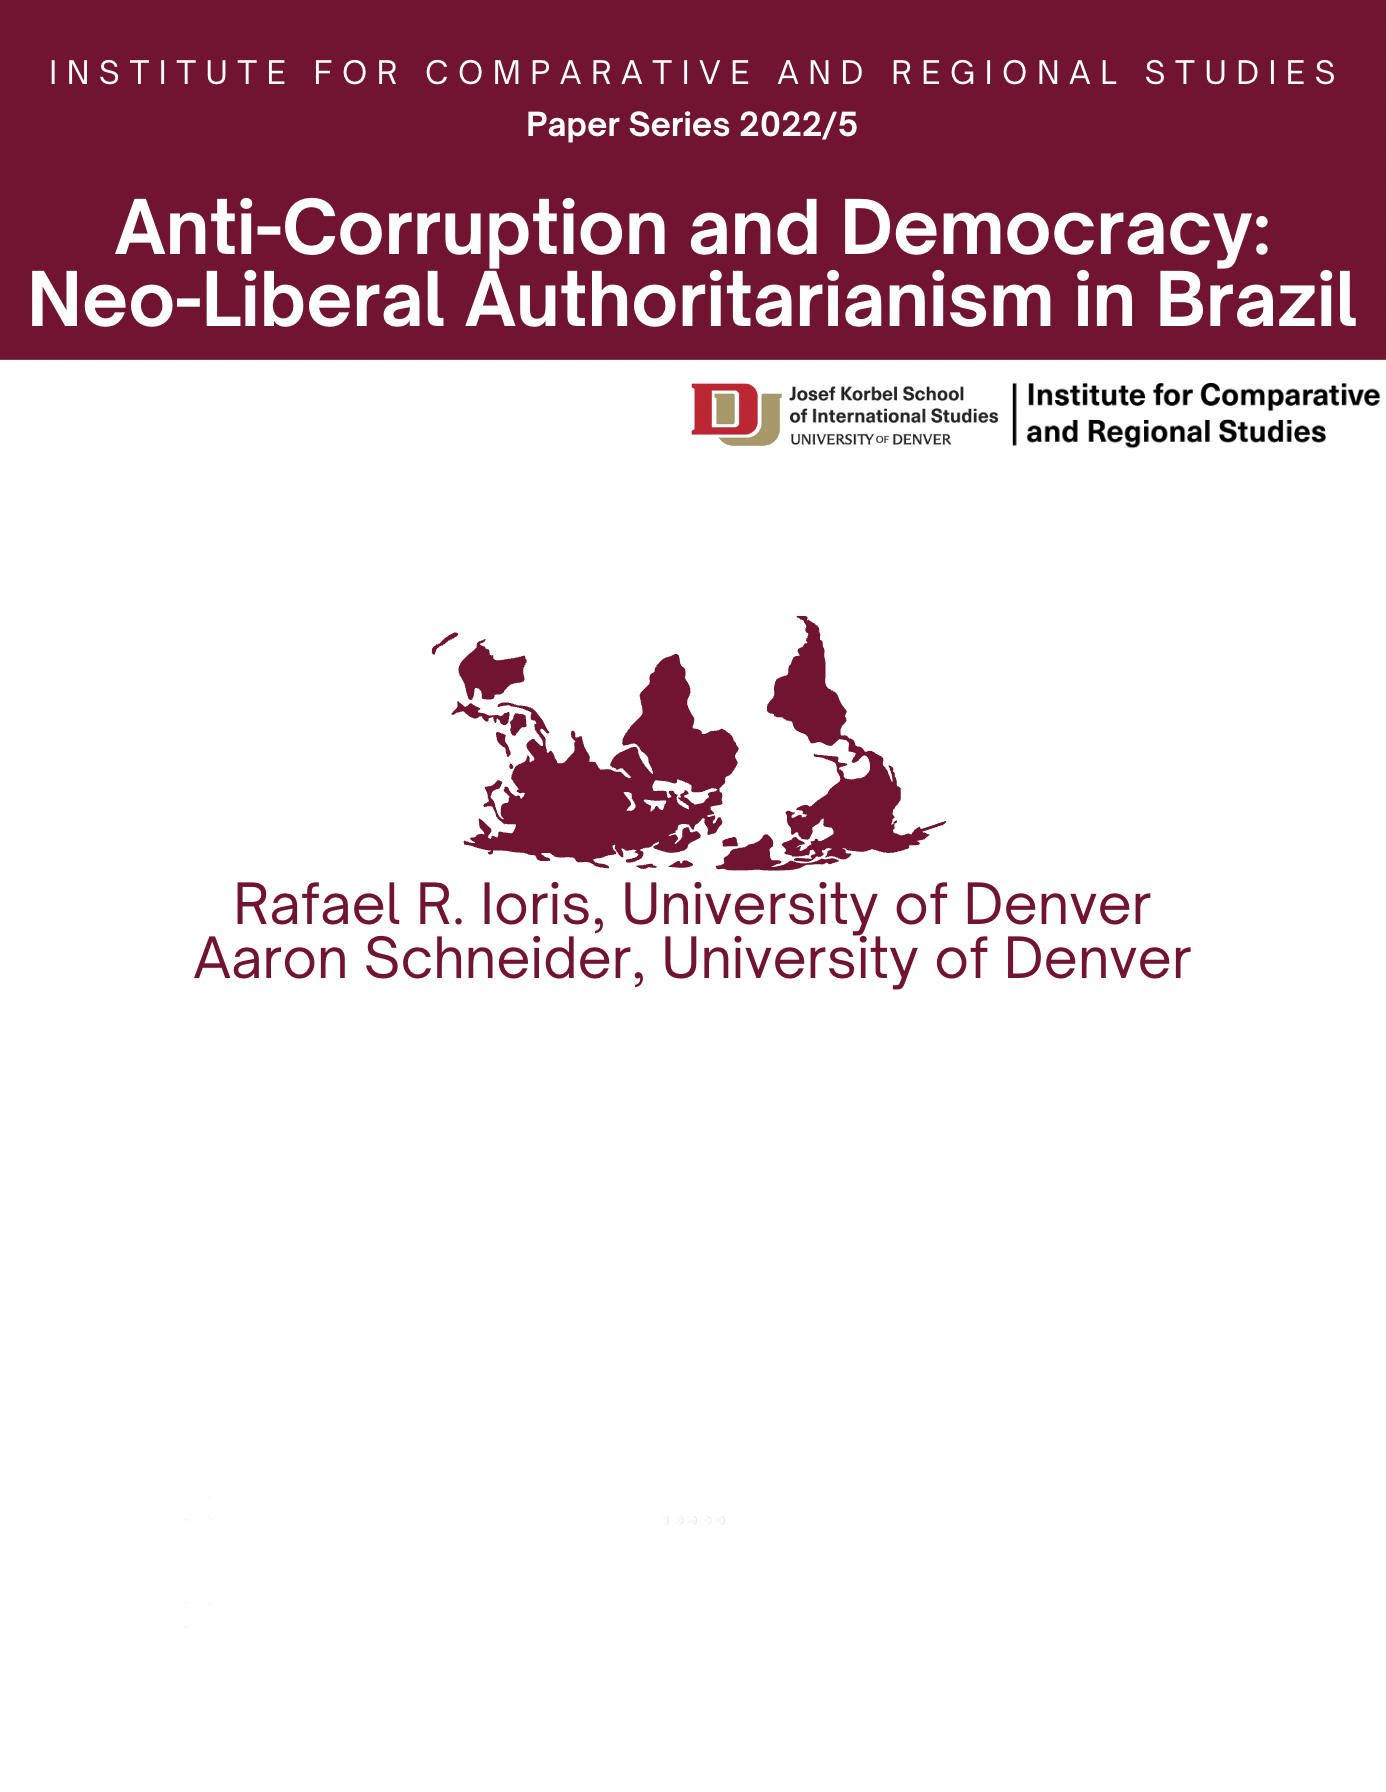 Anti-Corruption and Democracy: Neo-Liberal Authoritarianism in Brazil